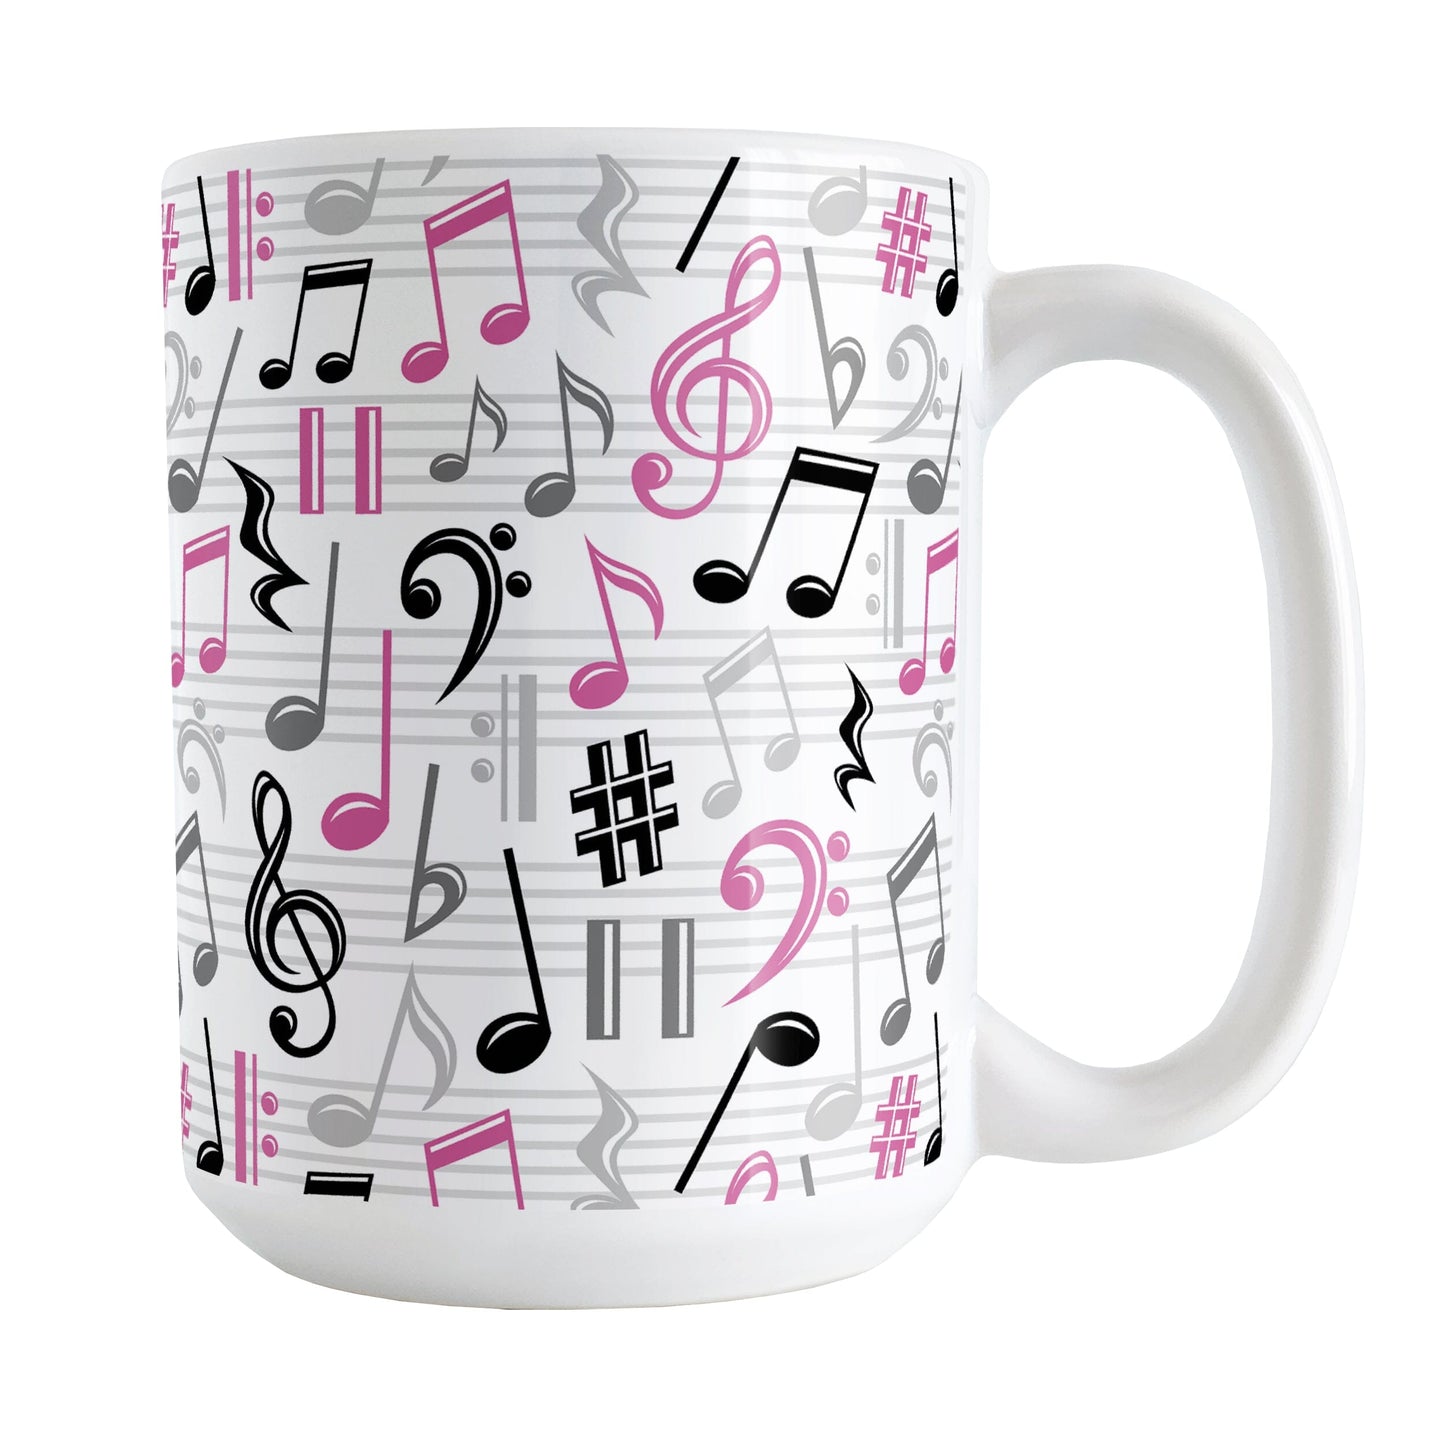 Pink Music Notes Pattern Mug (15oz) at Amy's Coffee Mugs. A ceramic coffee mug designed with music notes and symbols in pink, black, and gray in a pattern that wraps around the mug to the handle.